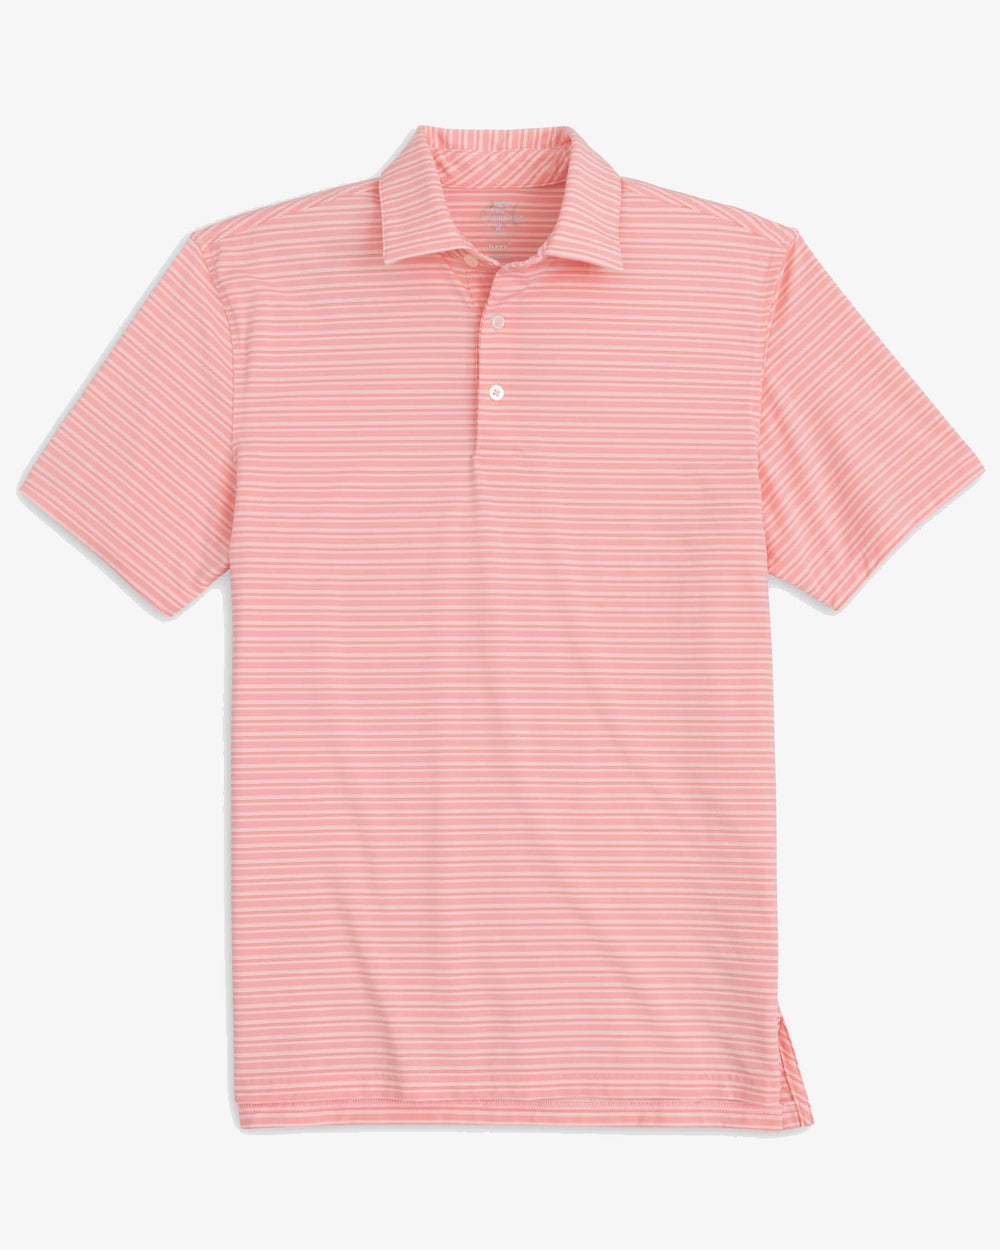 The front view of the Southern Tide brrr°®-eeze Bowen Stripe Performance Polo Shirt by Southern Tide - Rose Blush